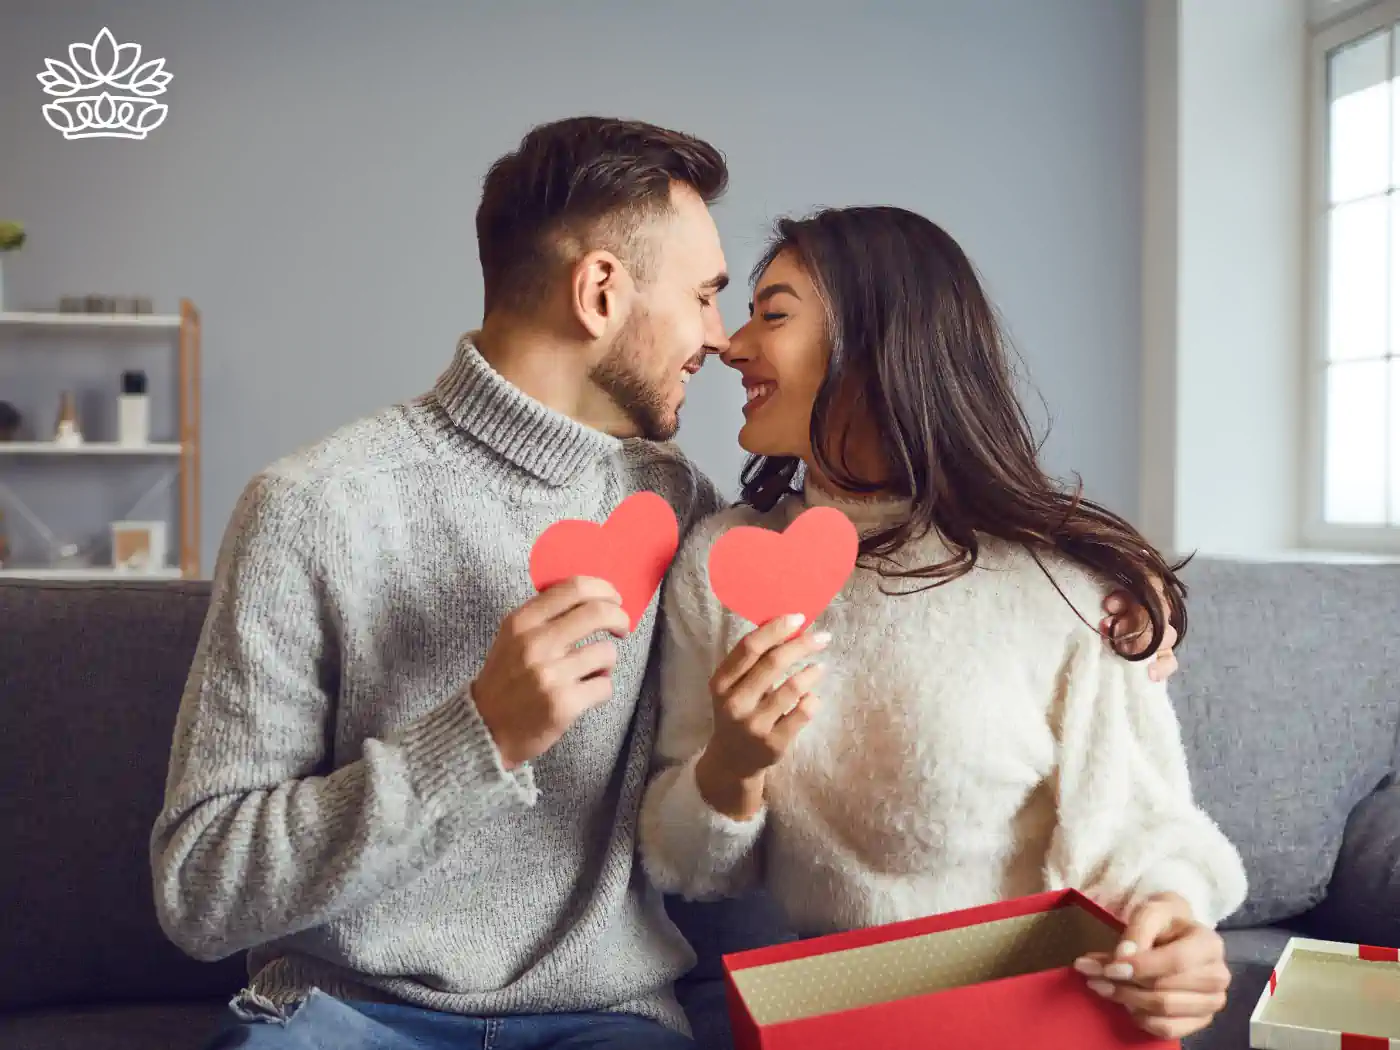 Couple exchanging heart-shaped gifts on Valentine's Day - Fabulous Flowers and Gifts, National Occasions.